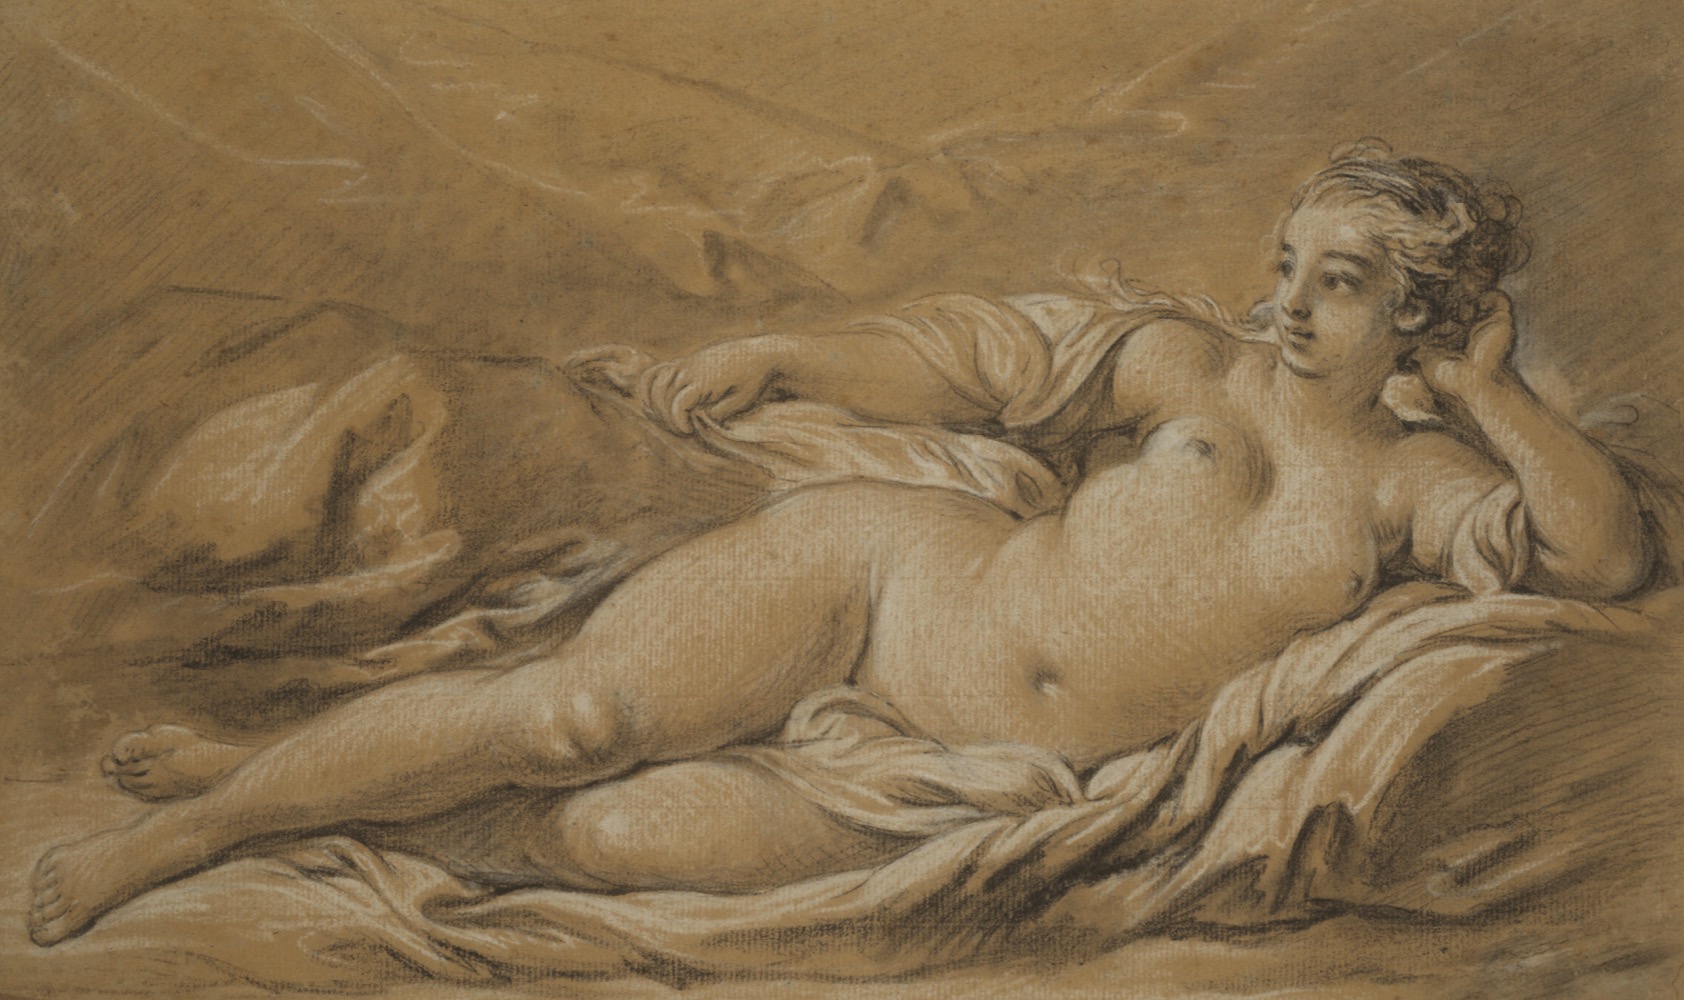 A Nude Woman Reclining, Looking to Her Right